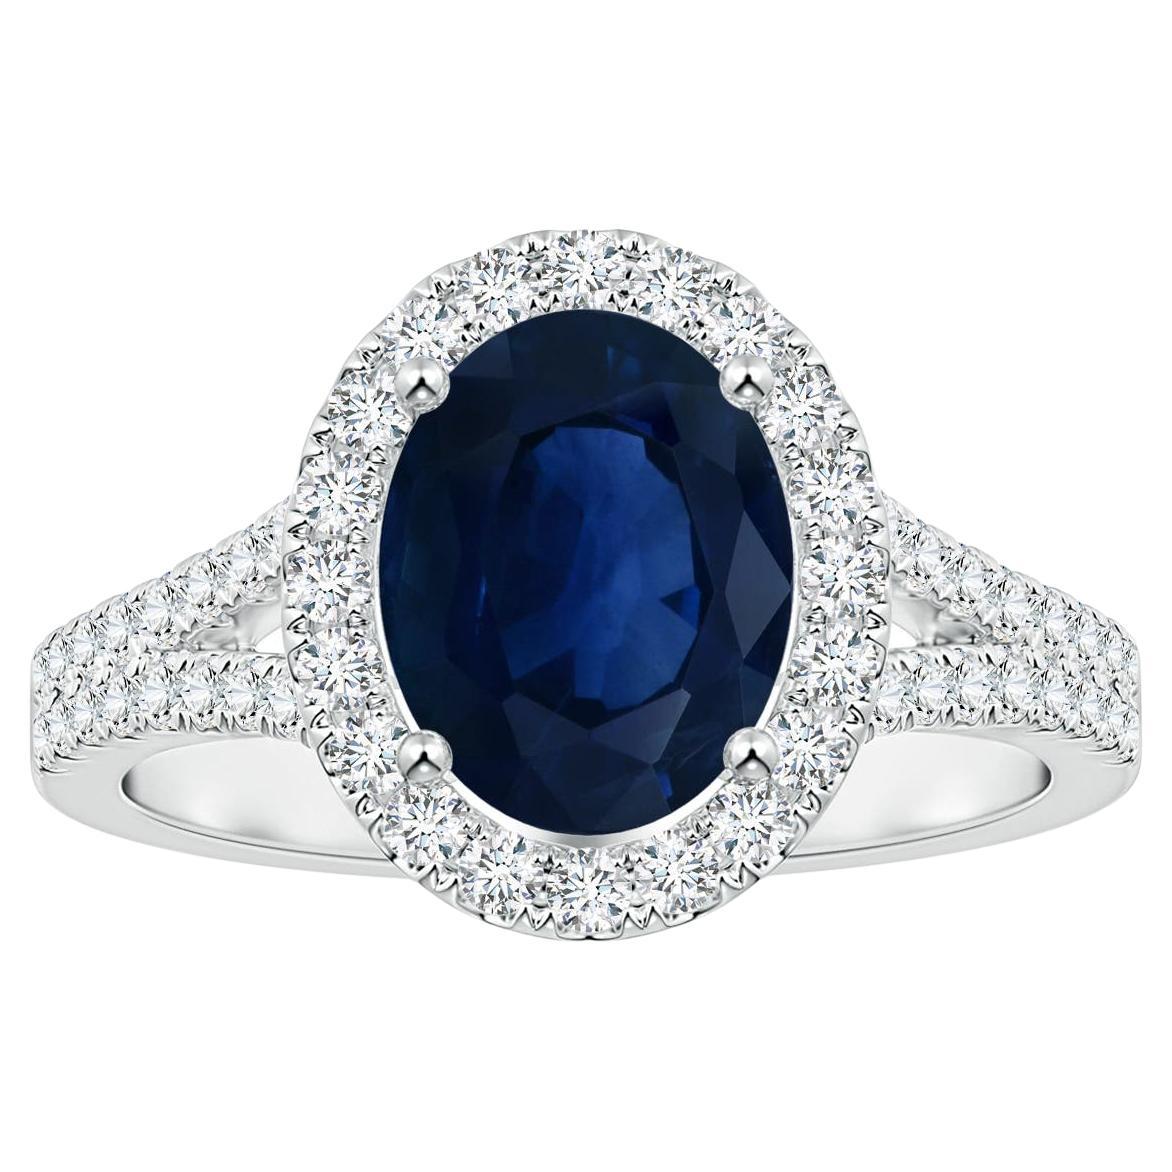 ANGARA GIA Certified Natural Sapphire Halo Ring in White Gold with Diamonds